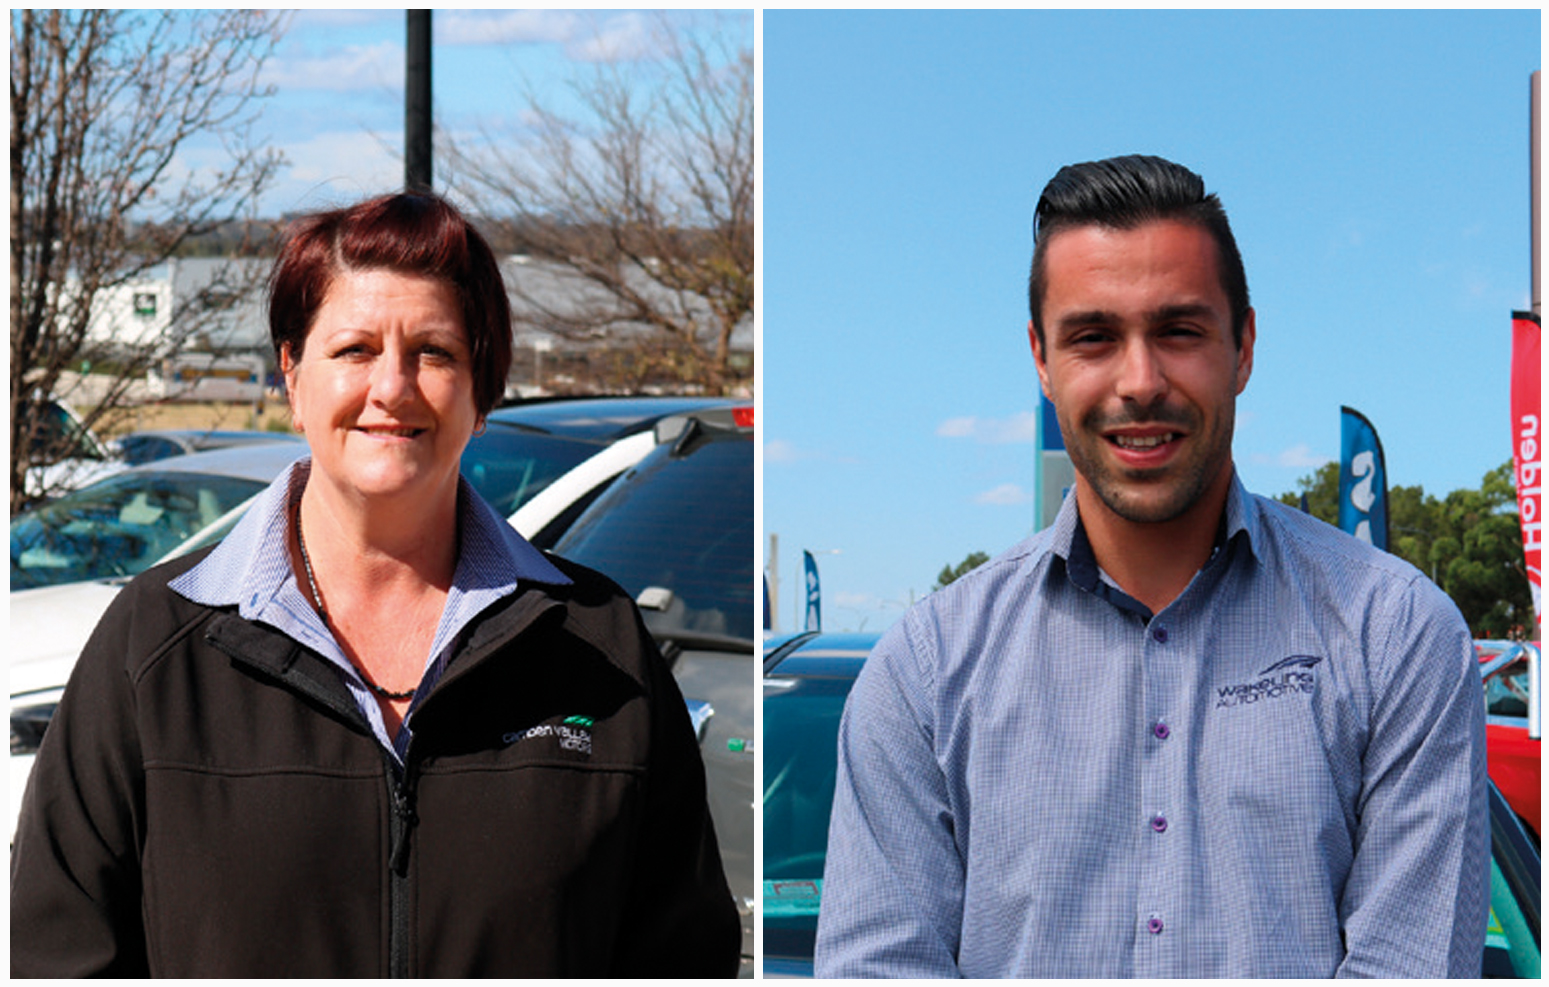 Congratulations to our January Employees of the Month!